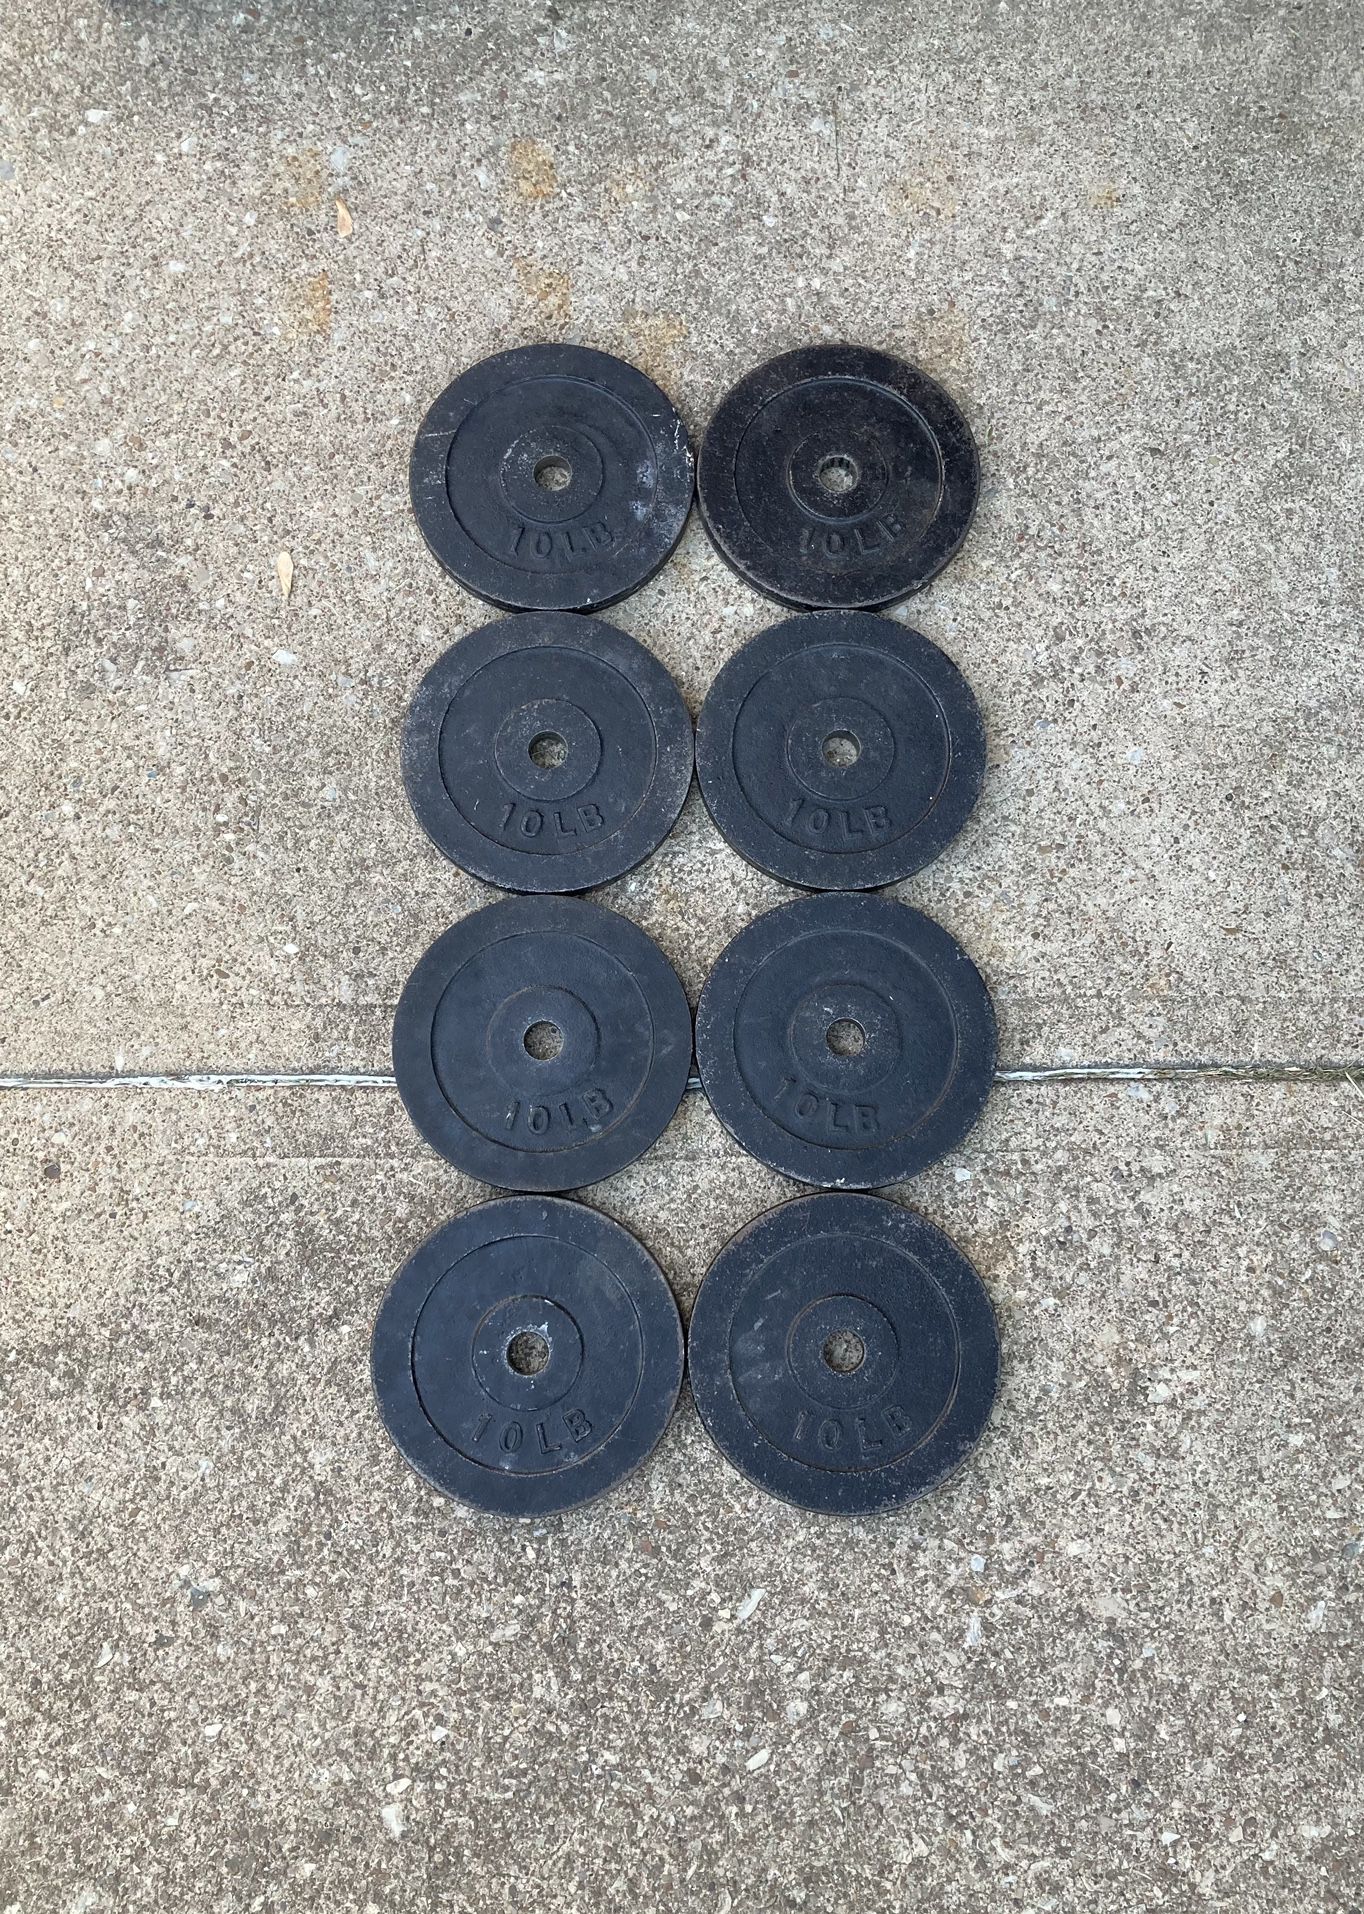 10lb ×8 Standard 1" weight plates weights plate 10 lb Is 10lbs 80lbs 80lb 80 Cast Iron pancake style for Barbell Dumbbell bar Dumbbells